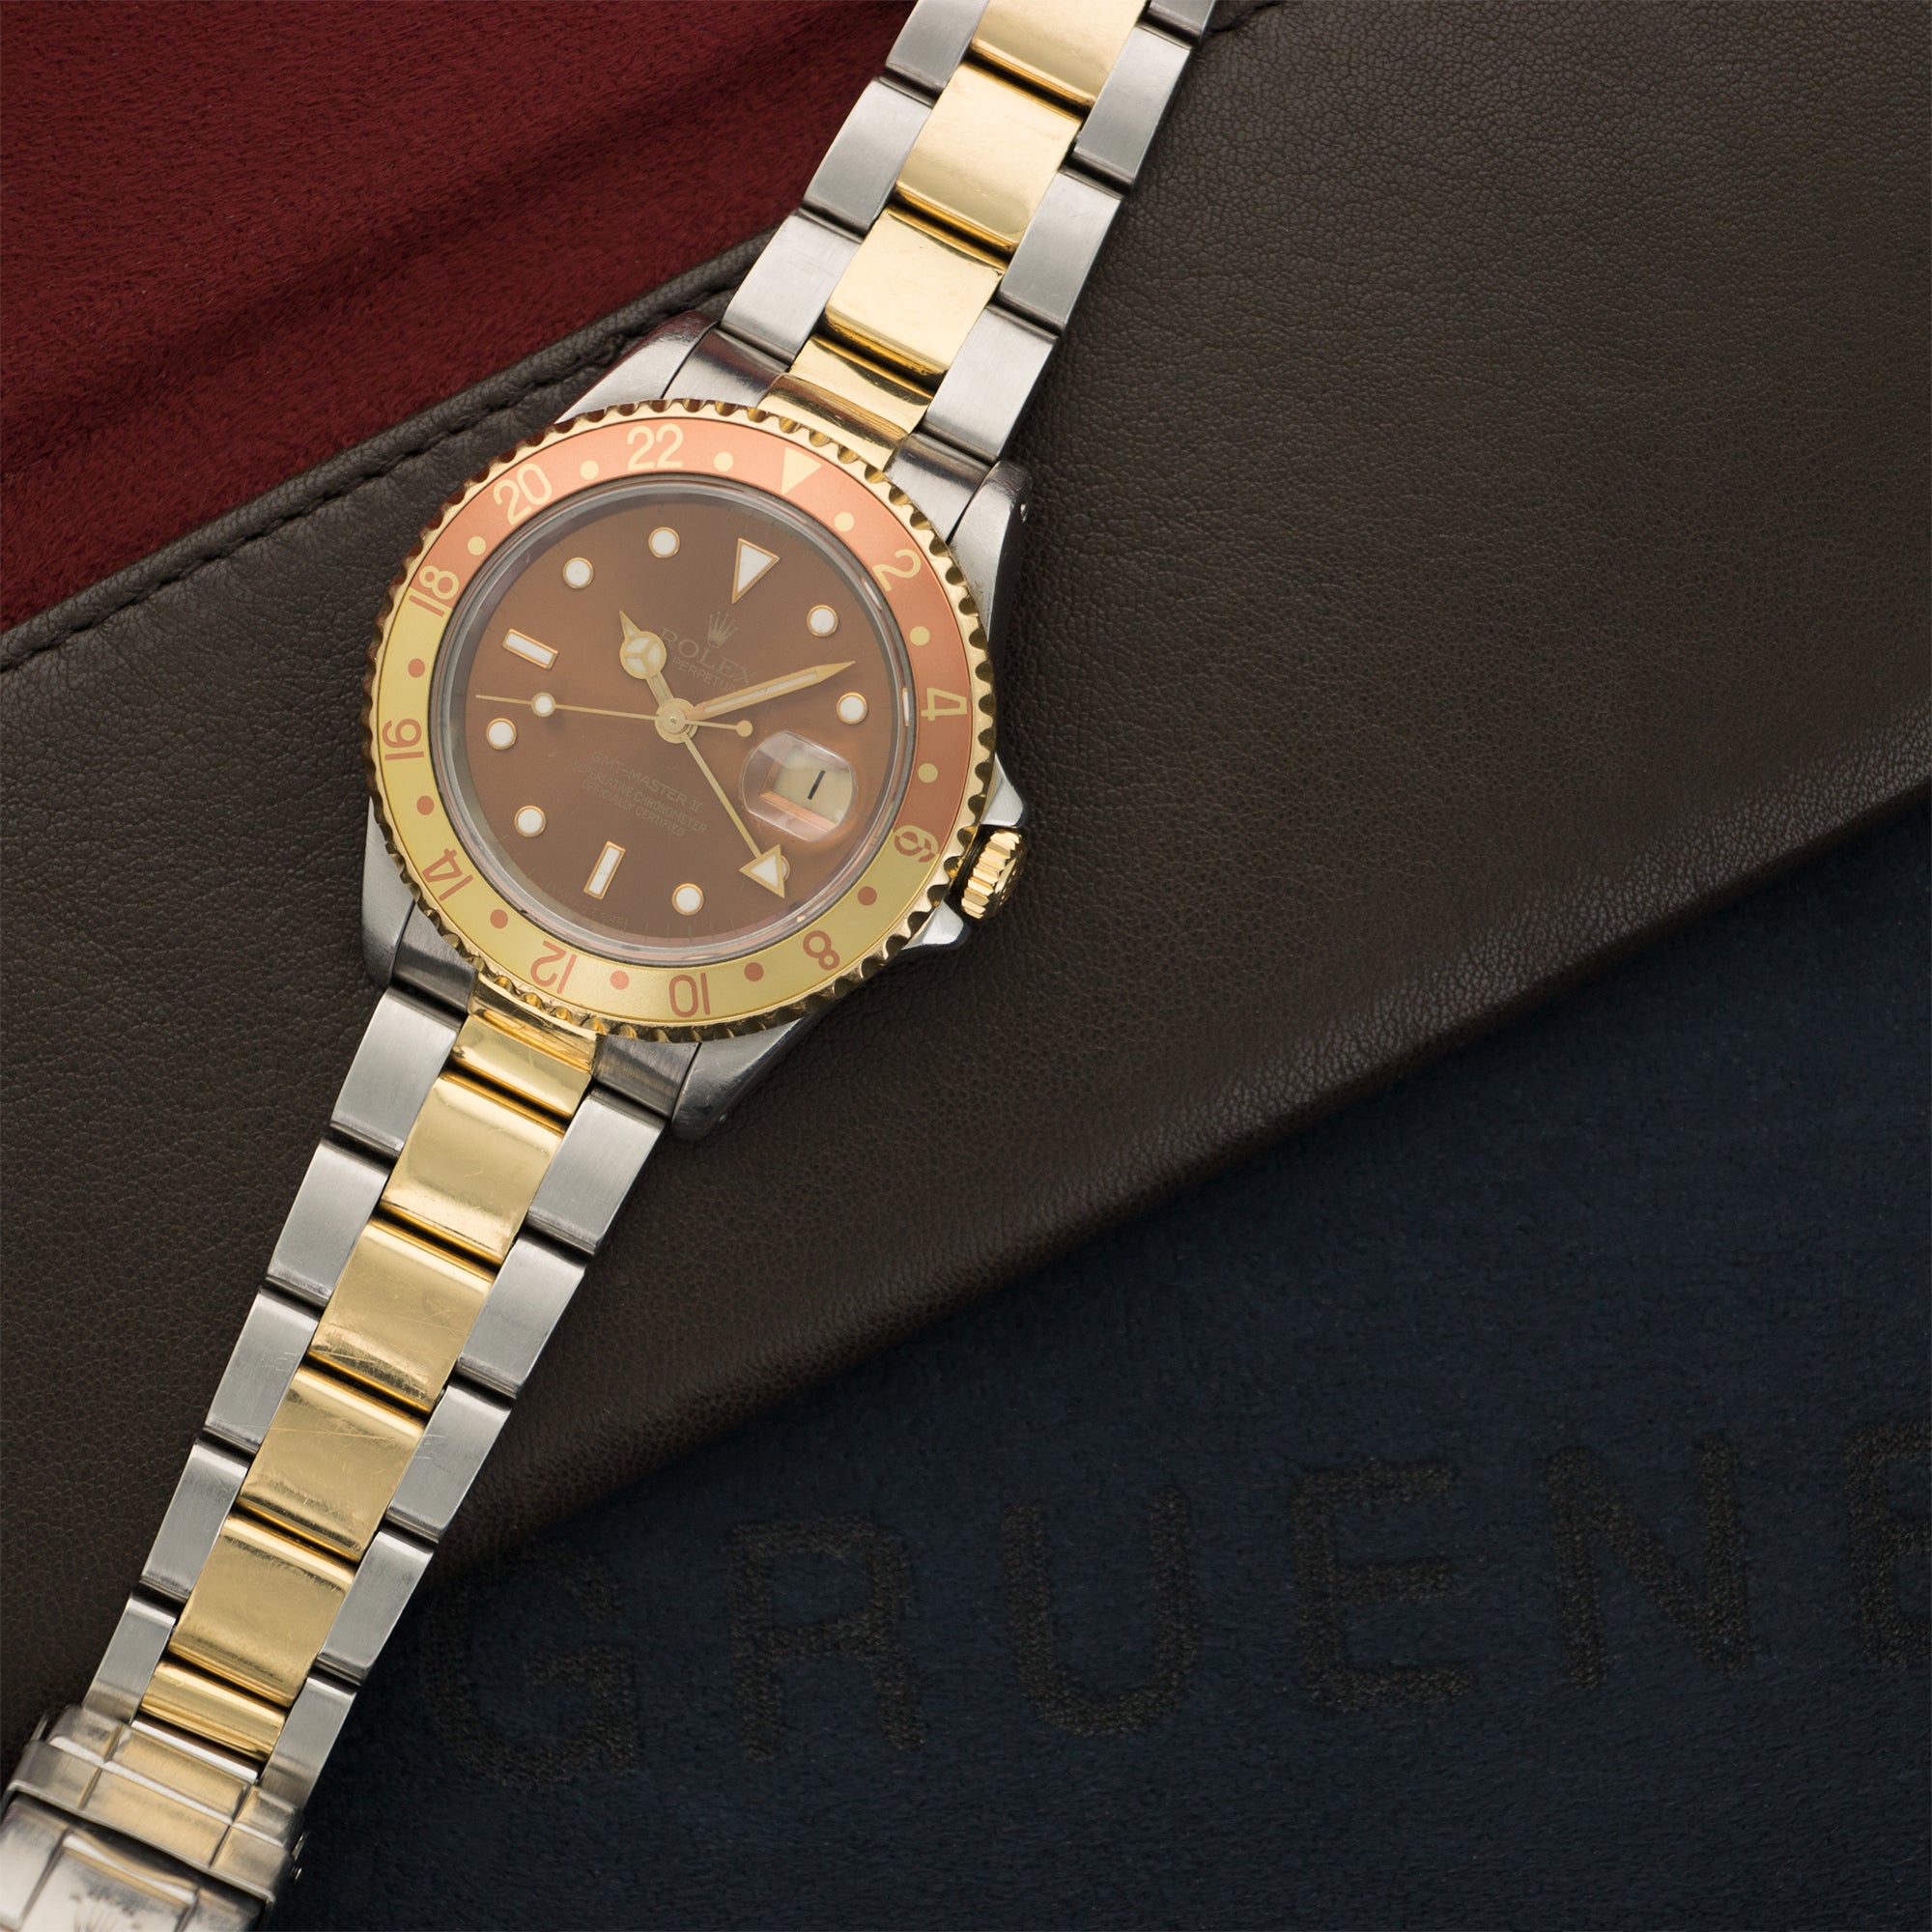 Rolex - Rolex Two-Tone GMT-Master II Root Beer Watch Ref. 16713 - The Keystone Watches